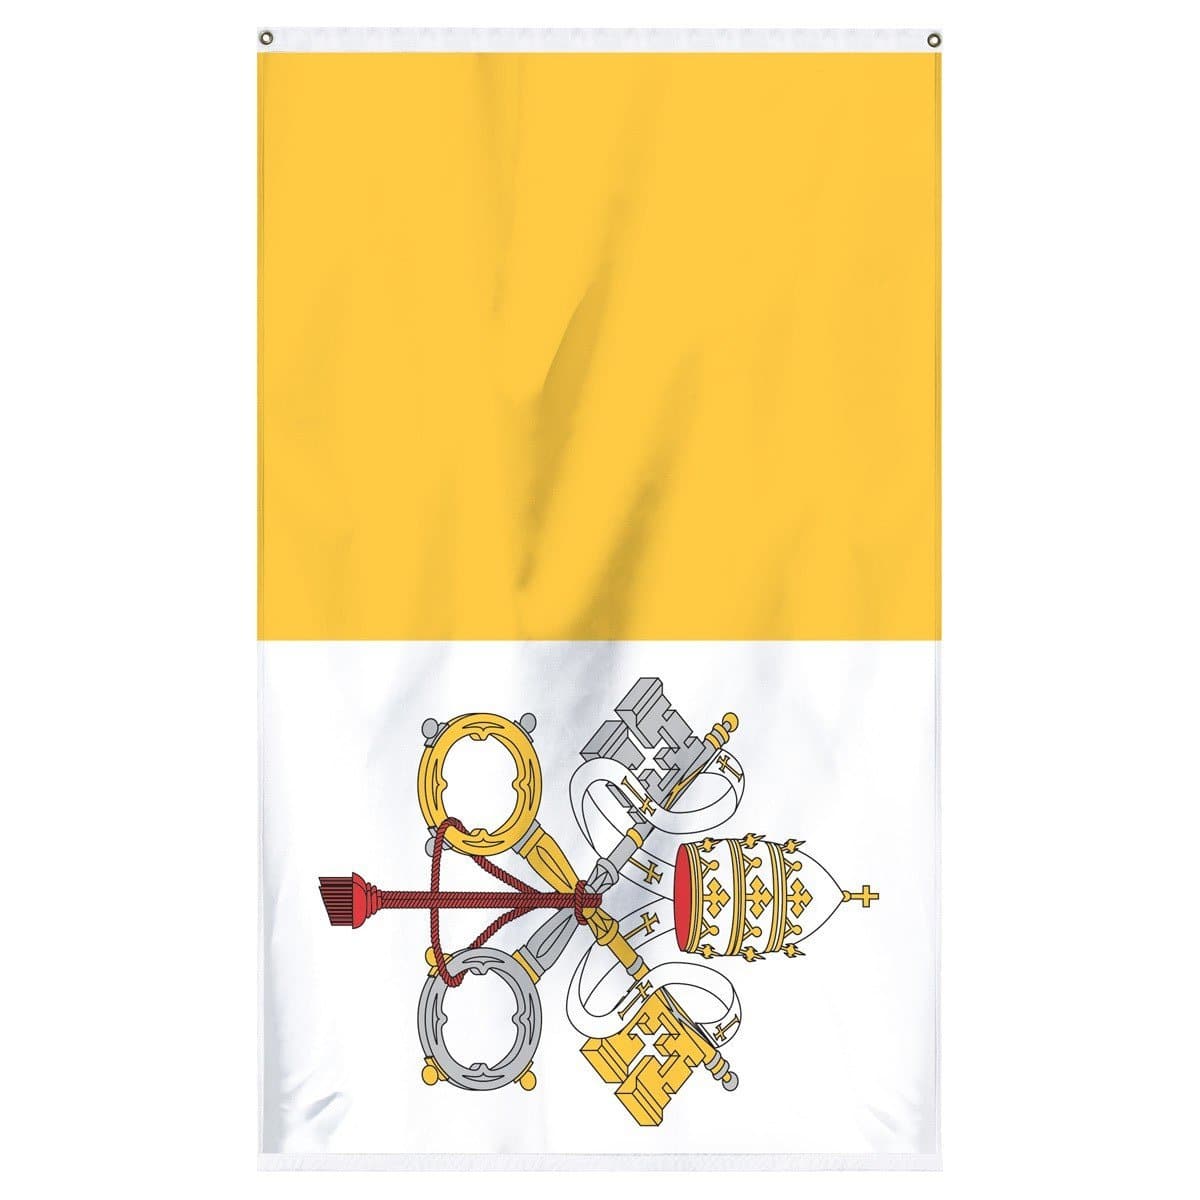 Vatican CIty Papal National flag for sale to buy online from the American company Atlantic Flag and Pole. A vertical bicolour of gold and white; charged with the Coats of arms of the Vatican City centered with the keys to heaven.